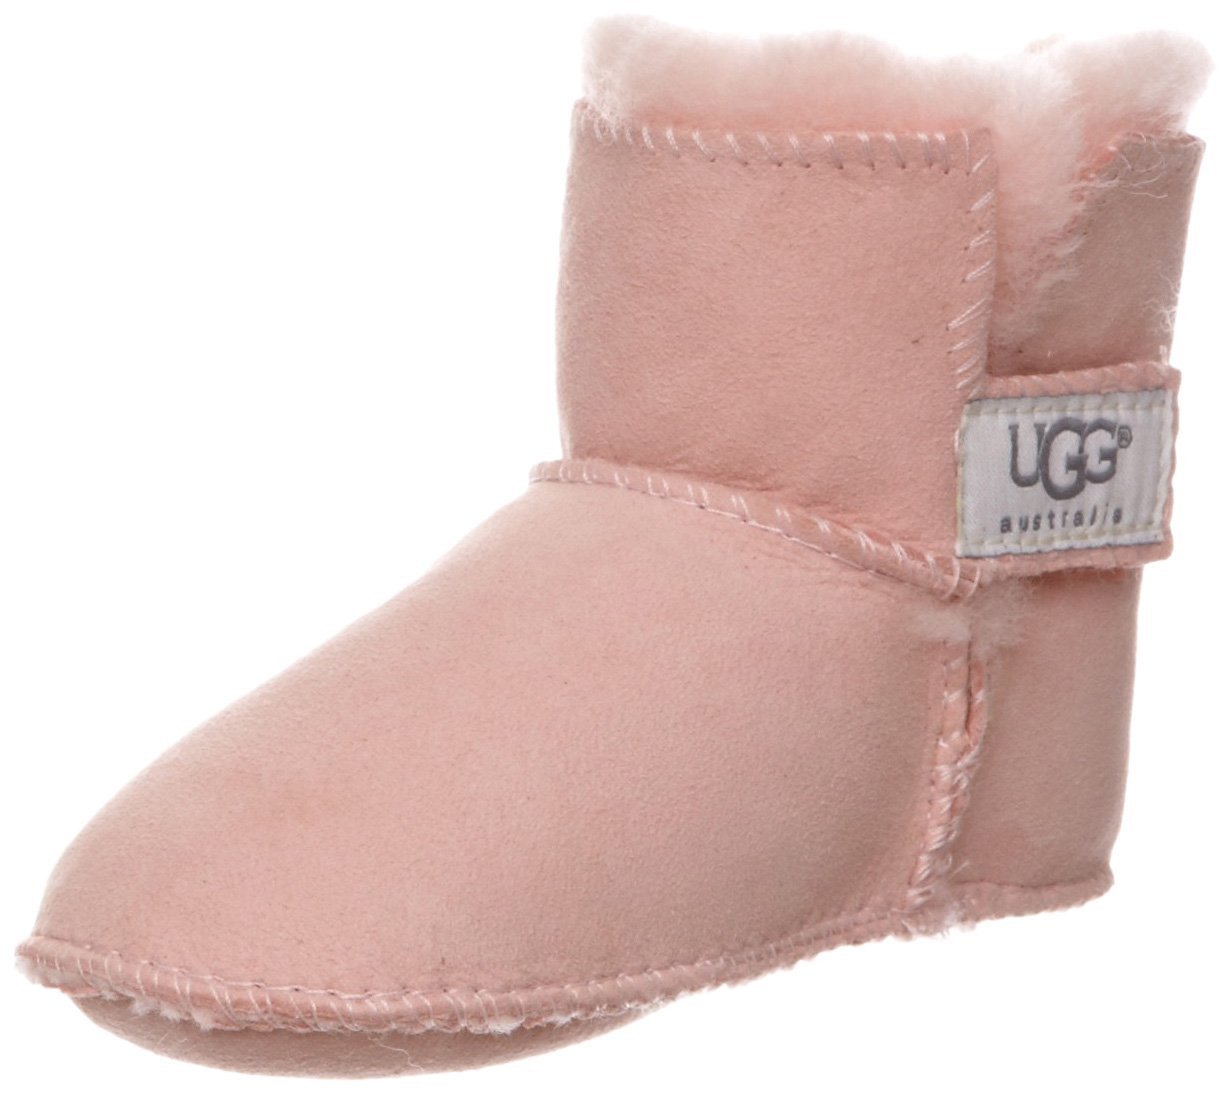 UGG Unisex-Baby Erin Boot Small Infant Baby Pink - image 1 of 7